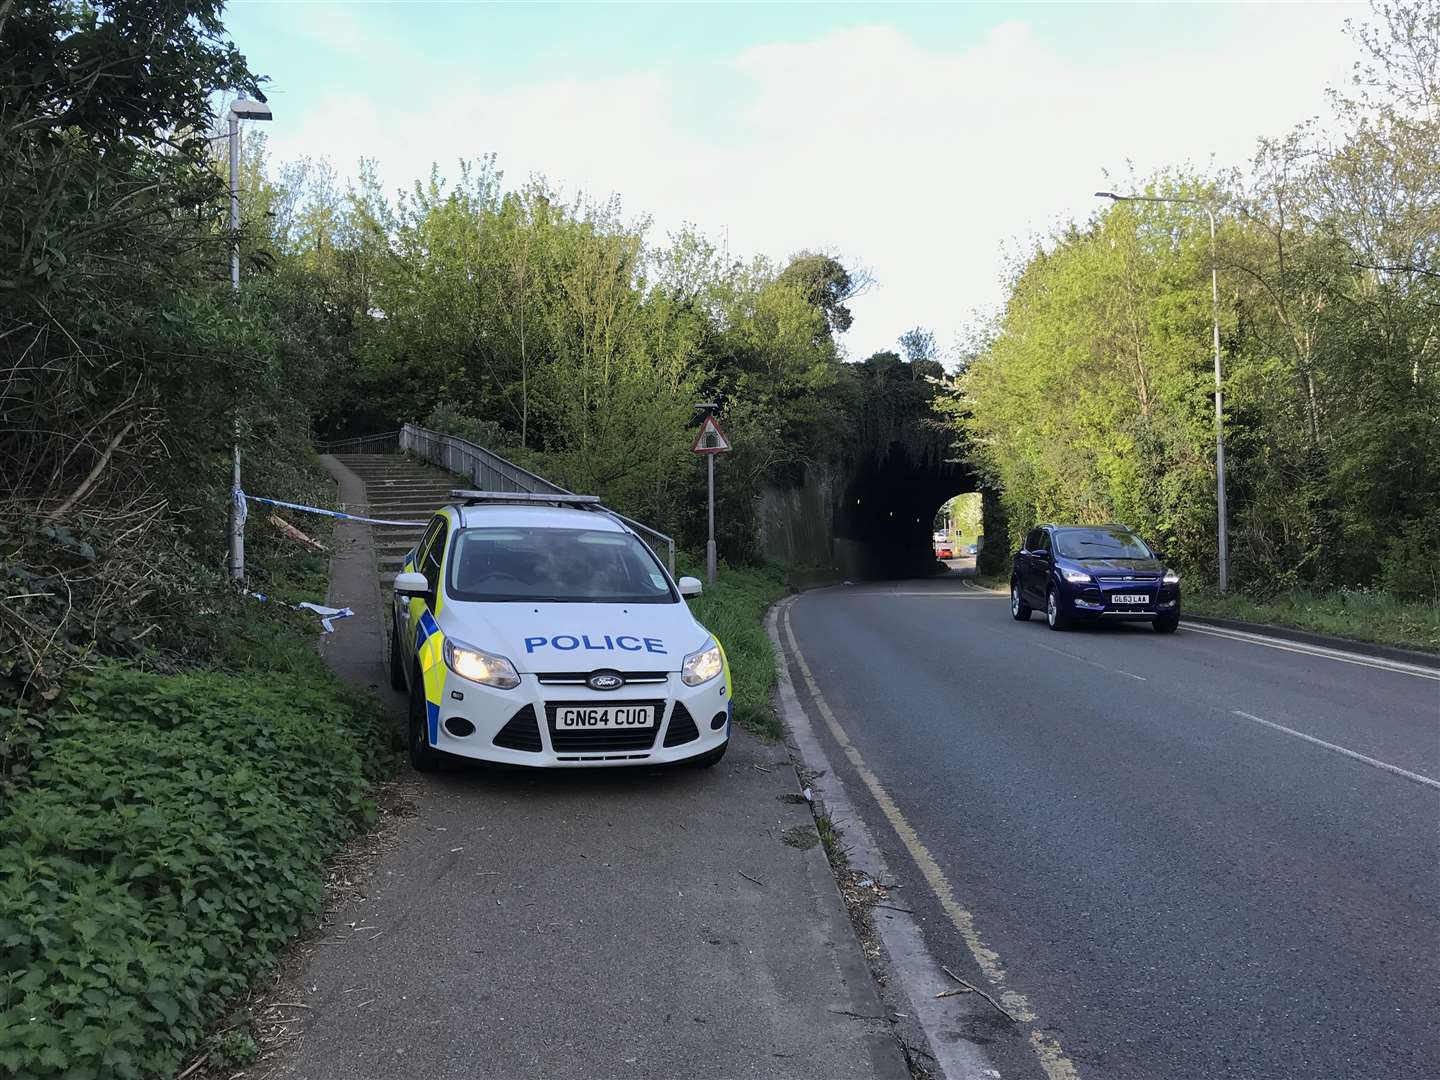 An unnamed woman was found dead in woodland off Thames Way, Gravesend